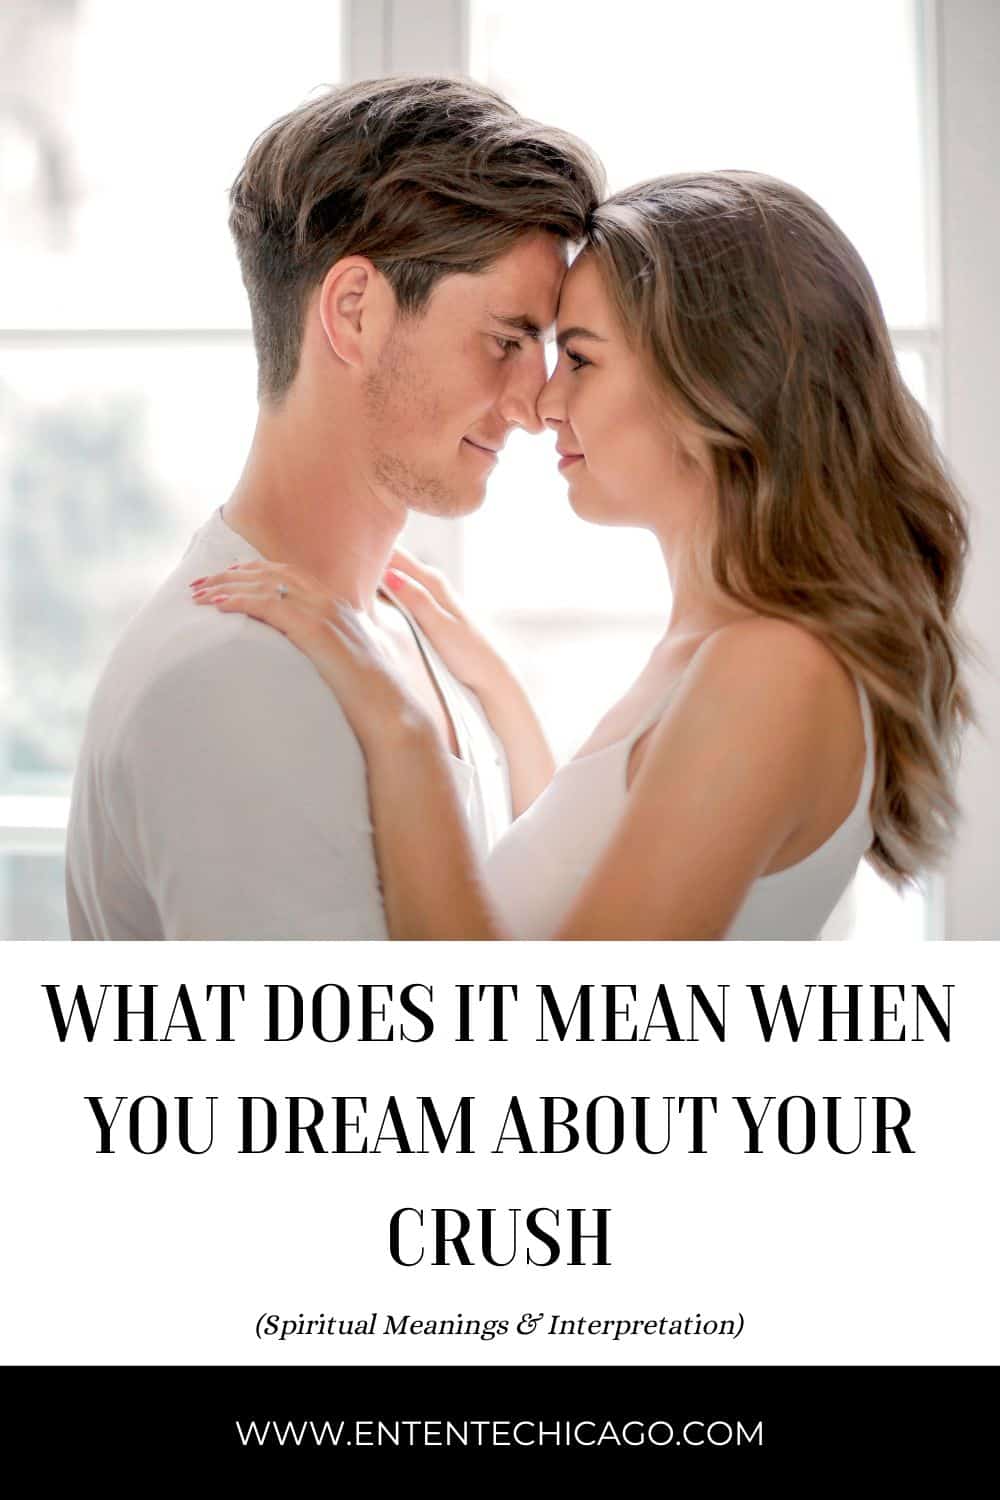 what does it mean when you dream about your crush? (Spiritual Meanings & Interpretation)